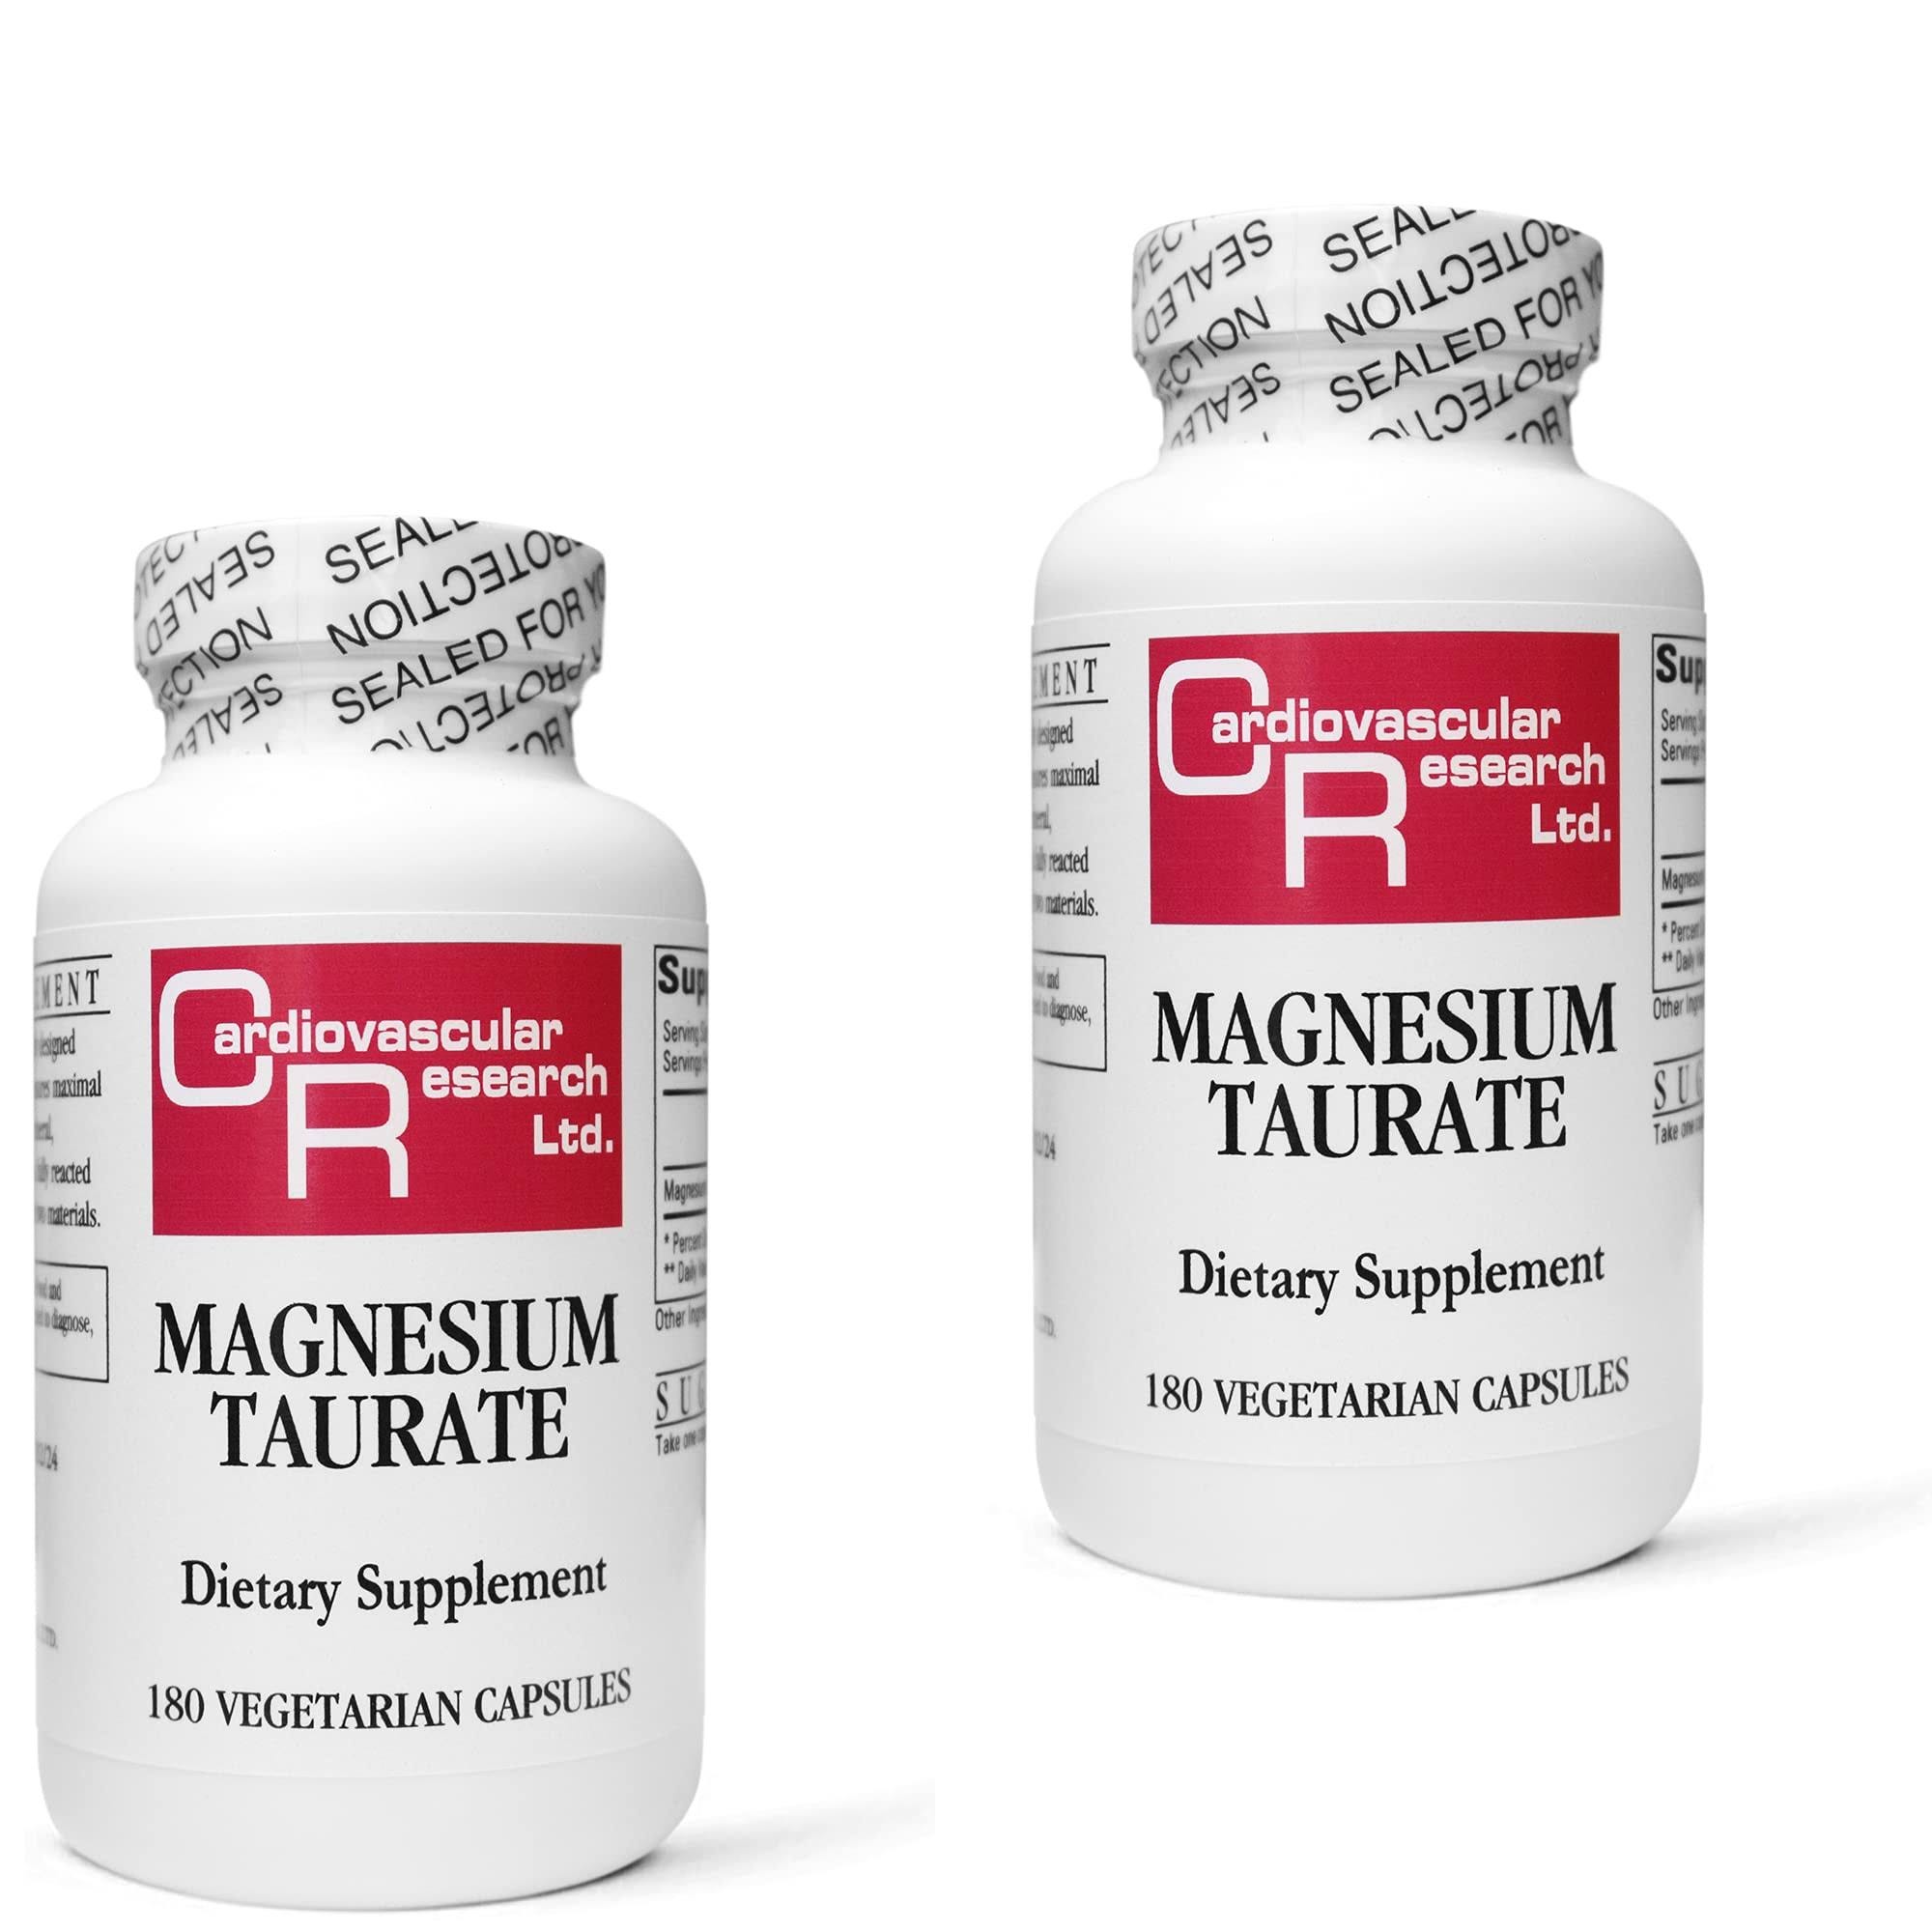 Cardiovascular Research Magnesium Taurate Capsules (360 Count, Pack of 2) | Image